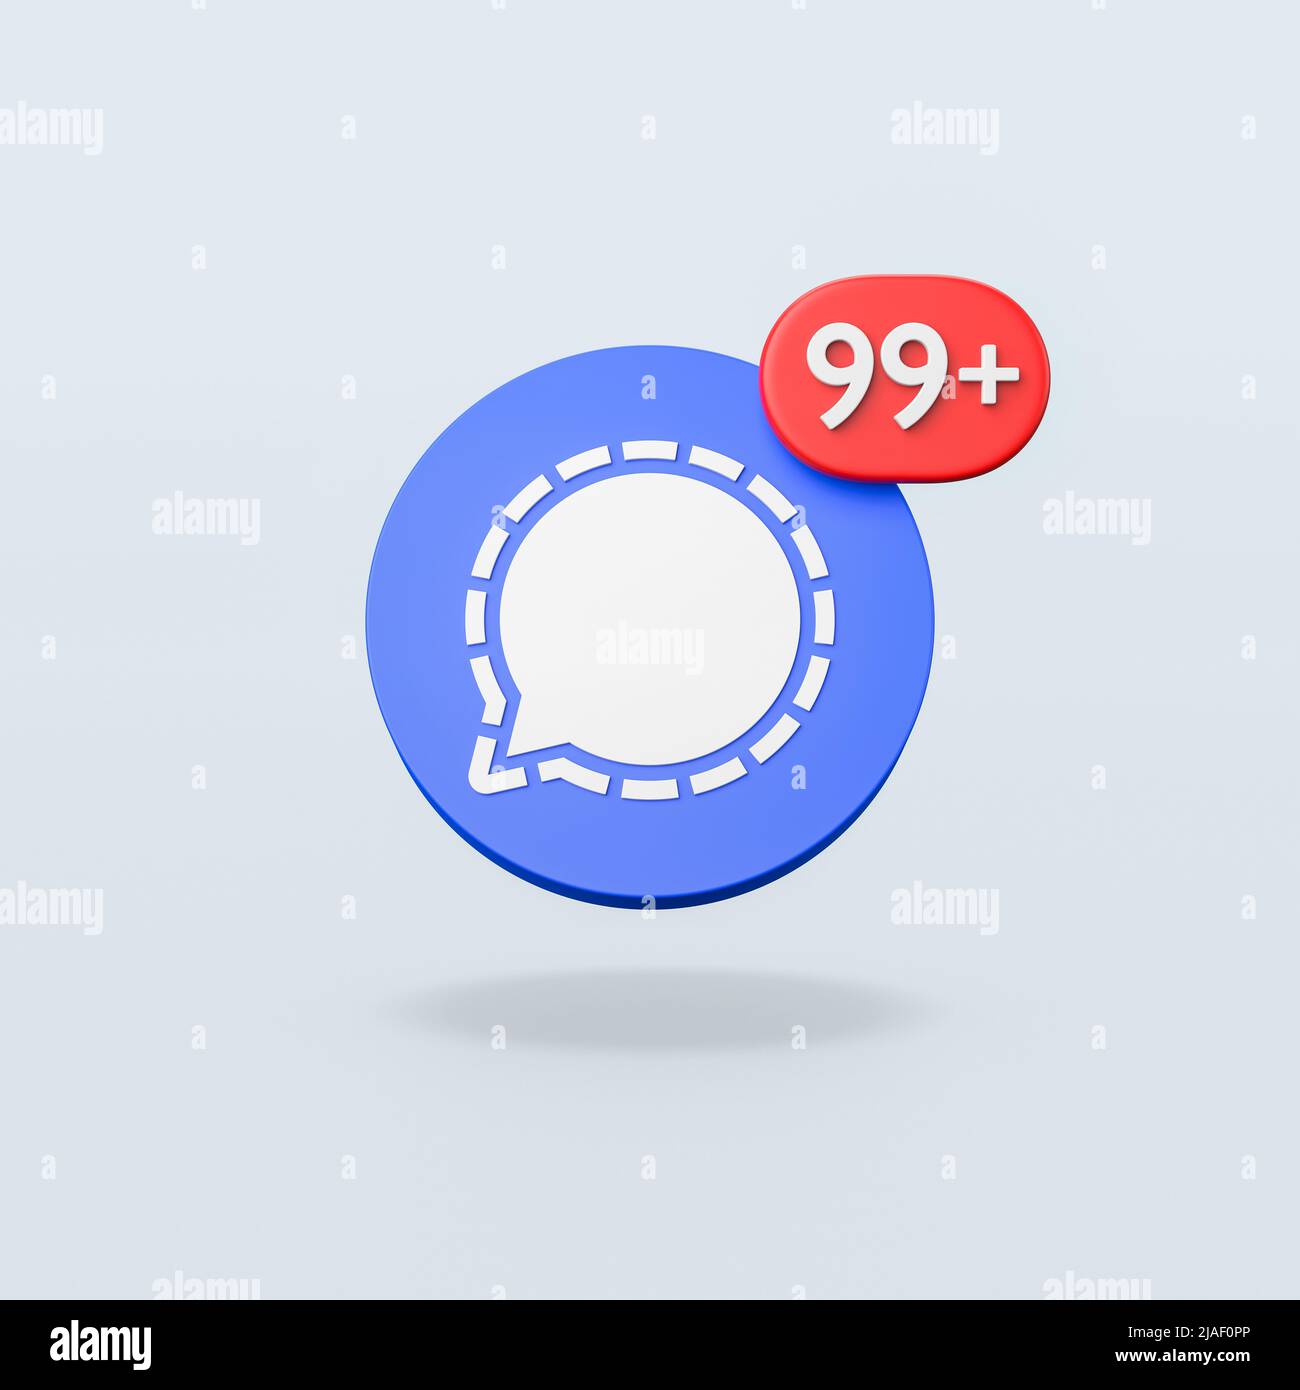 Signal Logo with 99 Notification on Blue Background Stock Photo